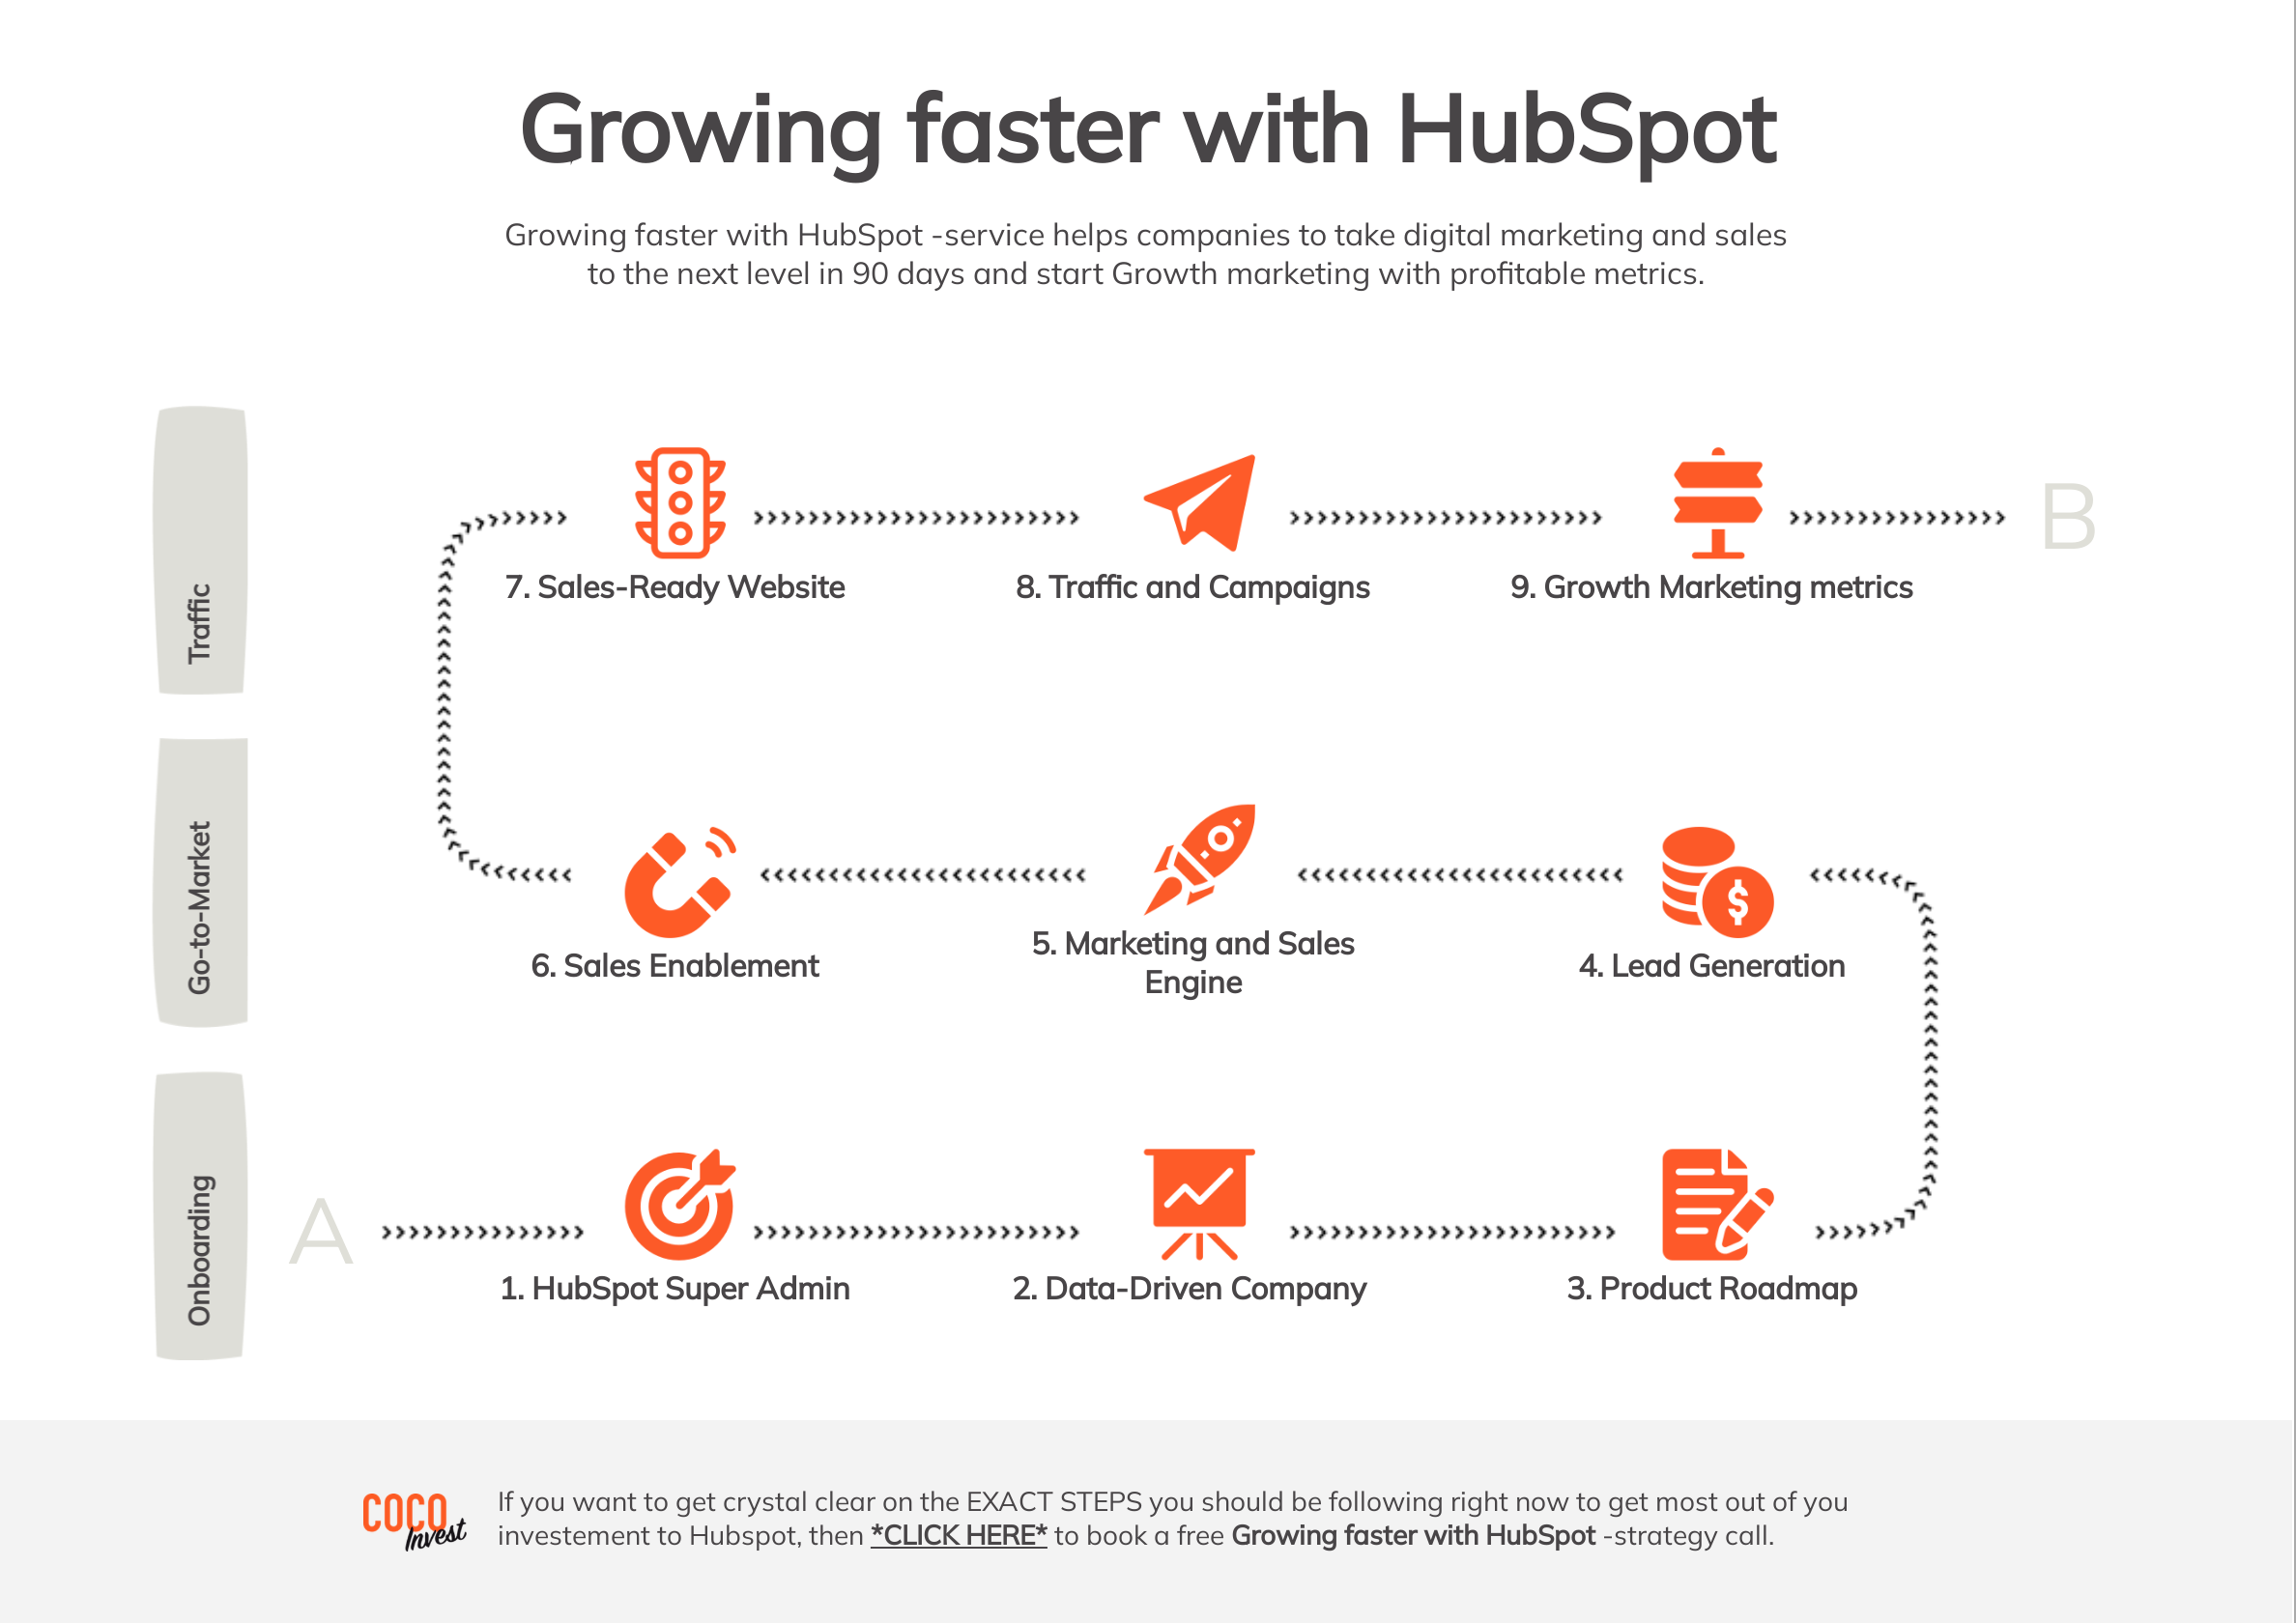 Grow faster with hubspot